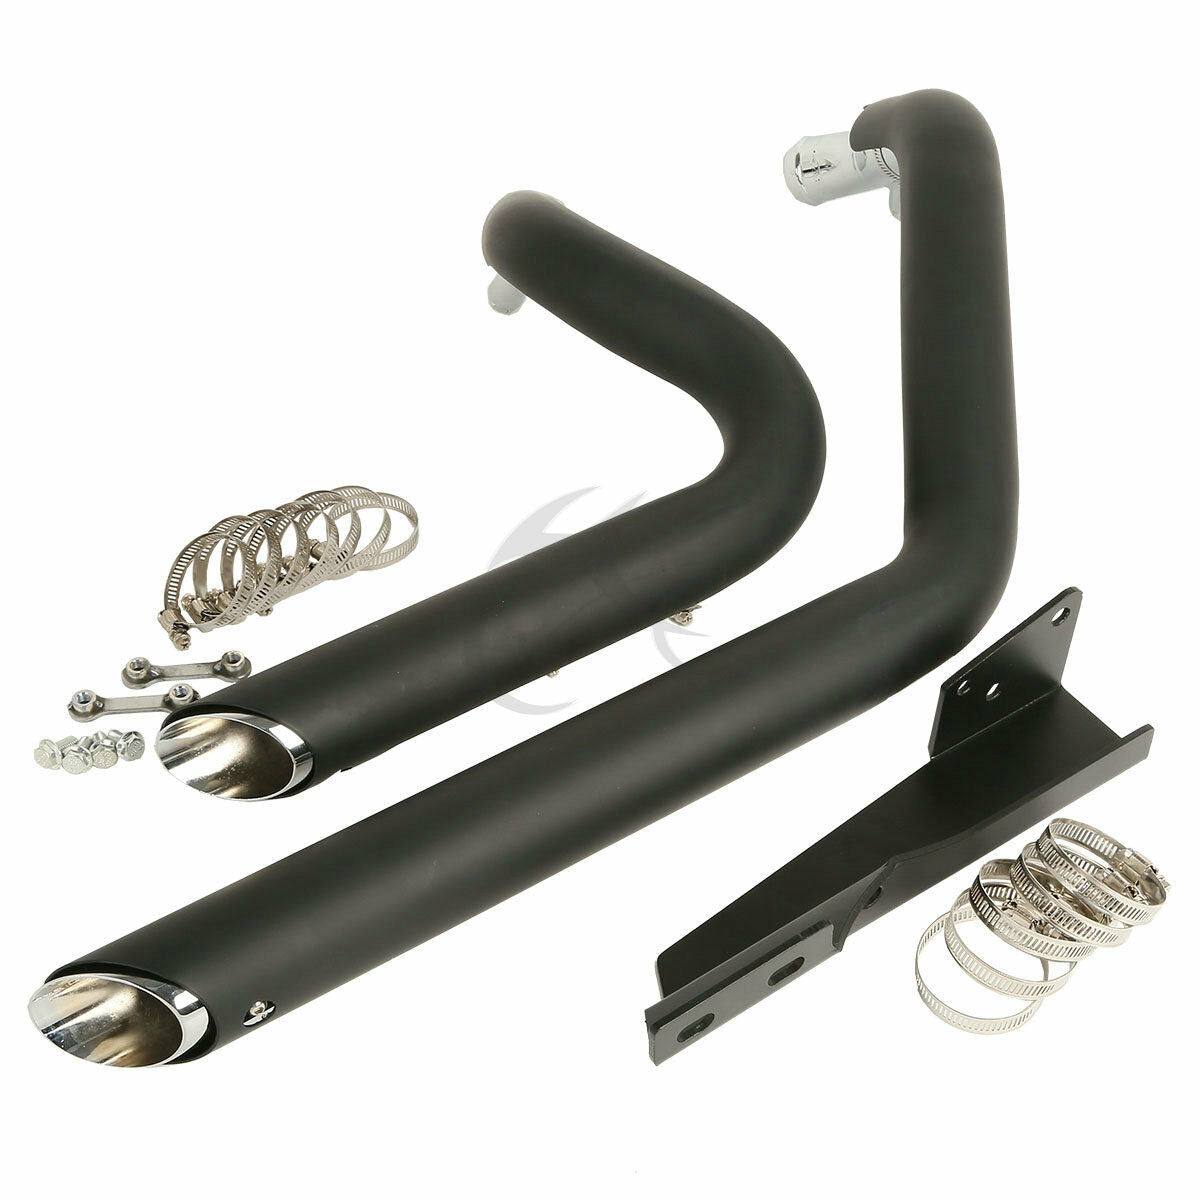 Staggered Shortshot Exhaust Pipes Fit For Harley Sportster XL 48 72 Custom 04-13 - Moto Life Products